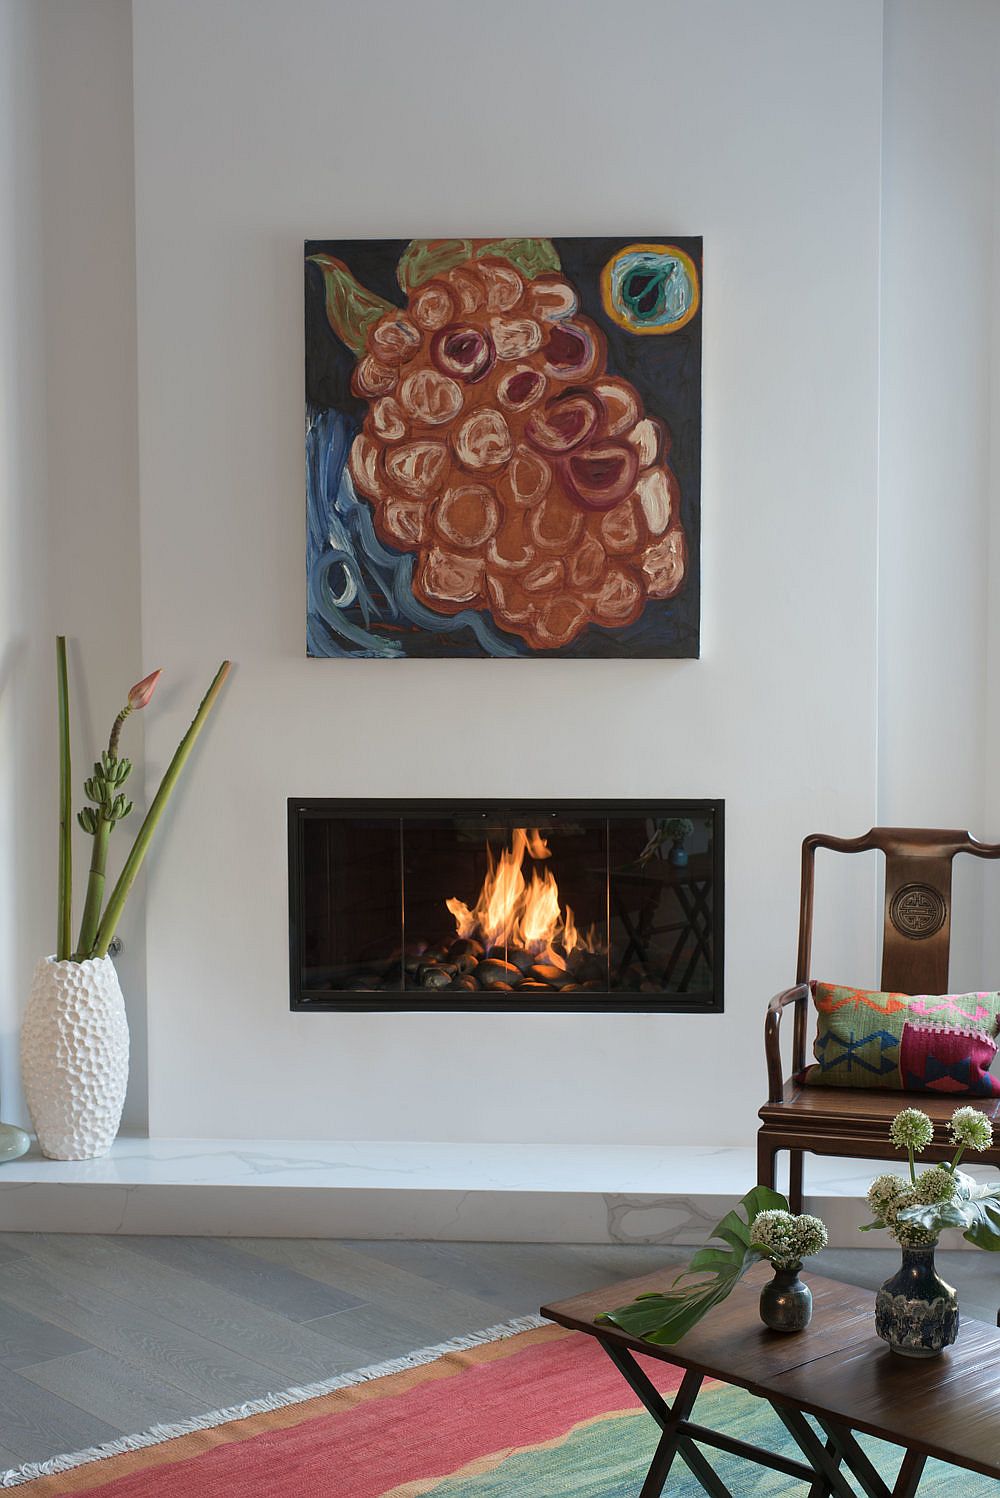 White Plaster fireplace and marble hearth create a cozy focal point